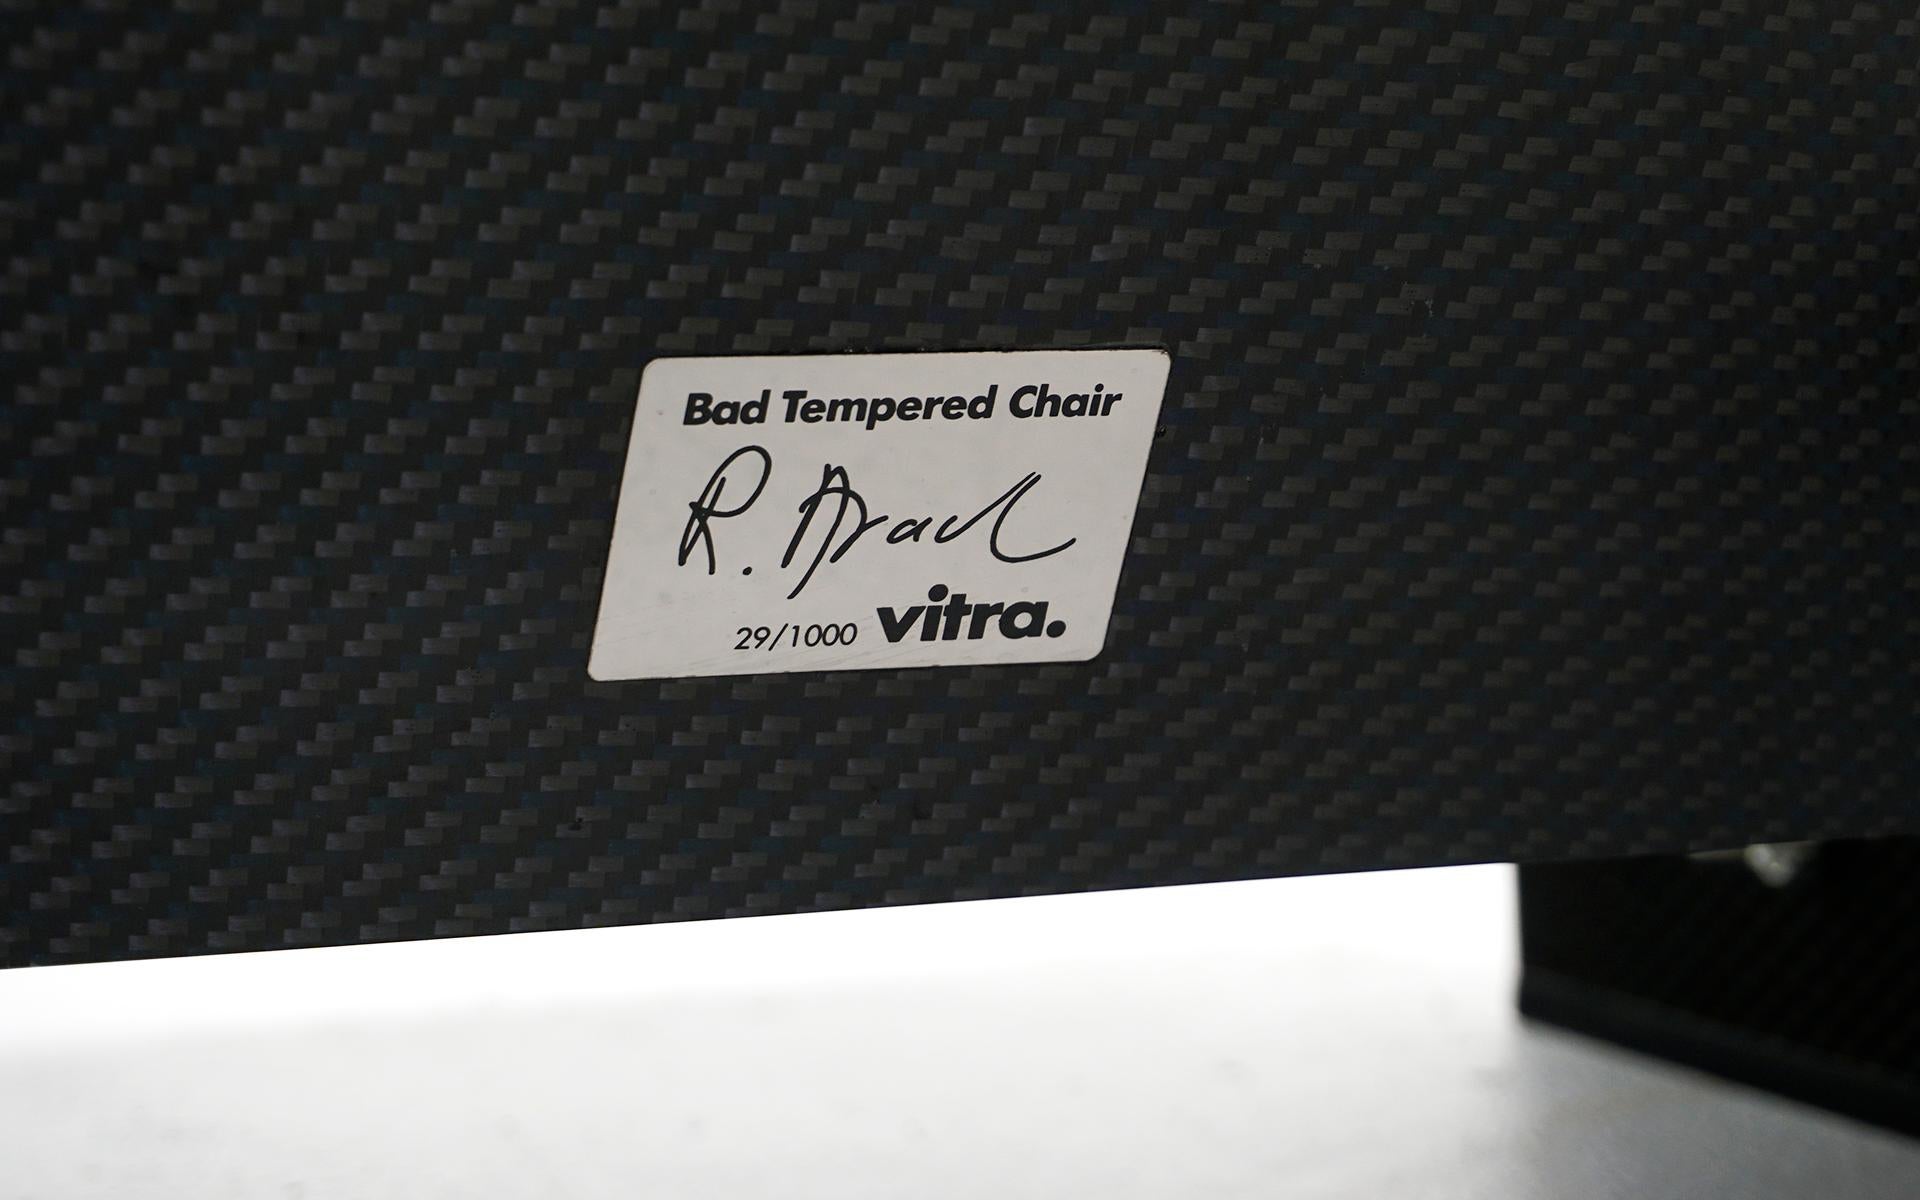 Metal Ron Arad Bad Tempered Chair #29/1000 for Vitra, 2002, Carbon Fiber, Signed For Sale